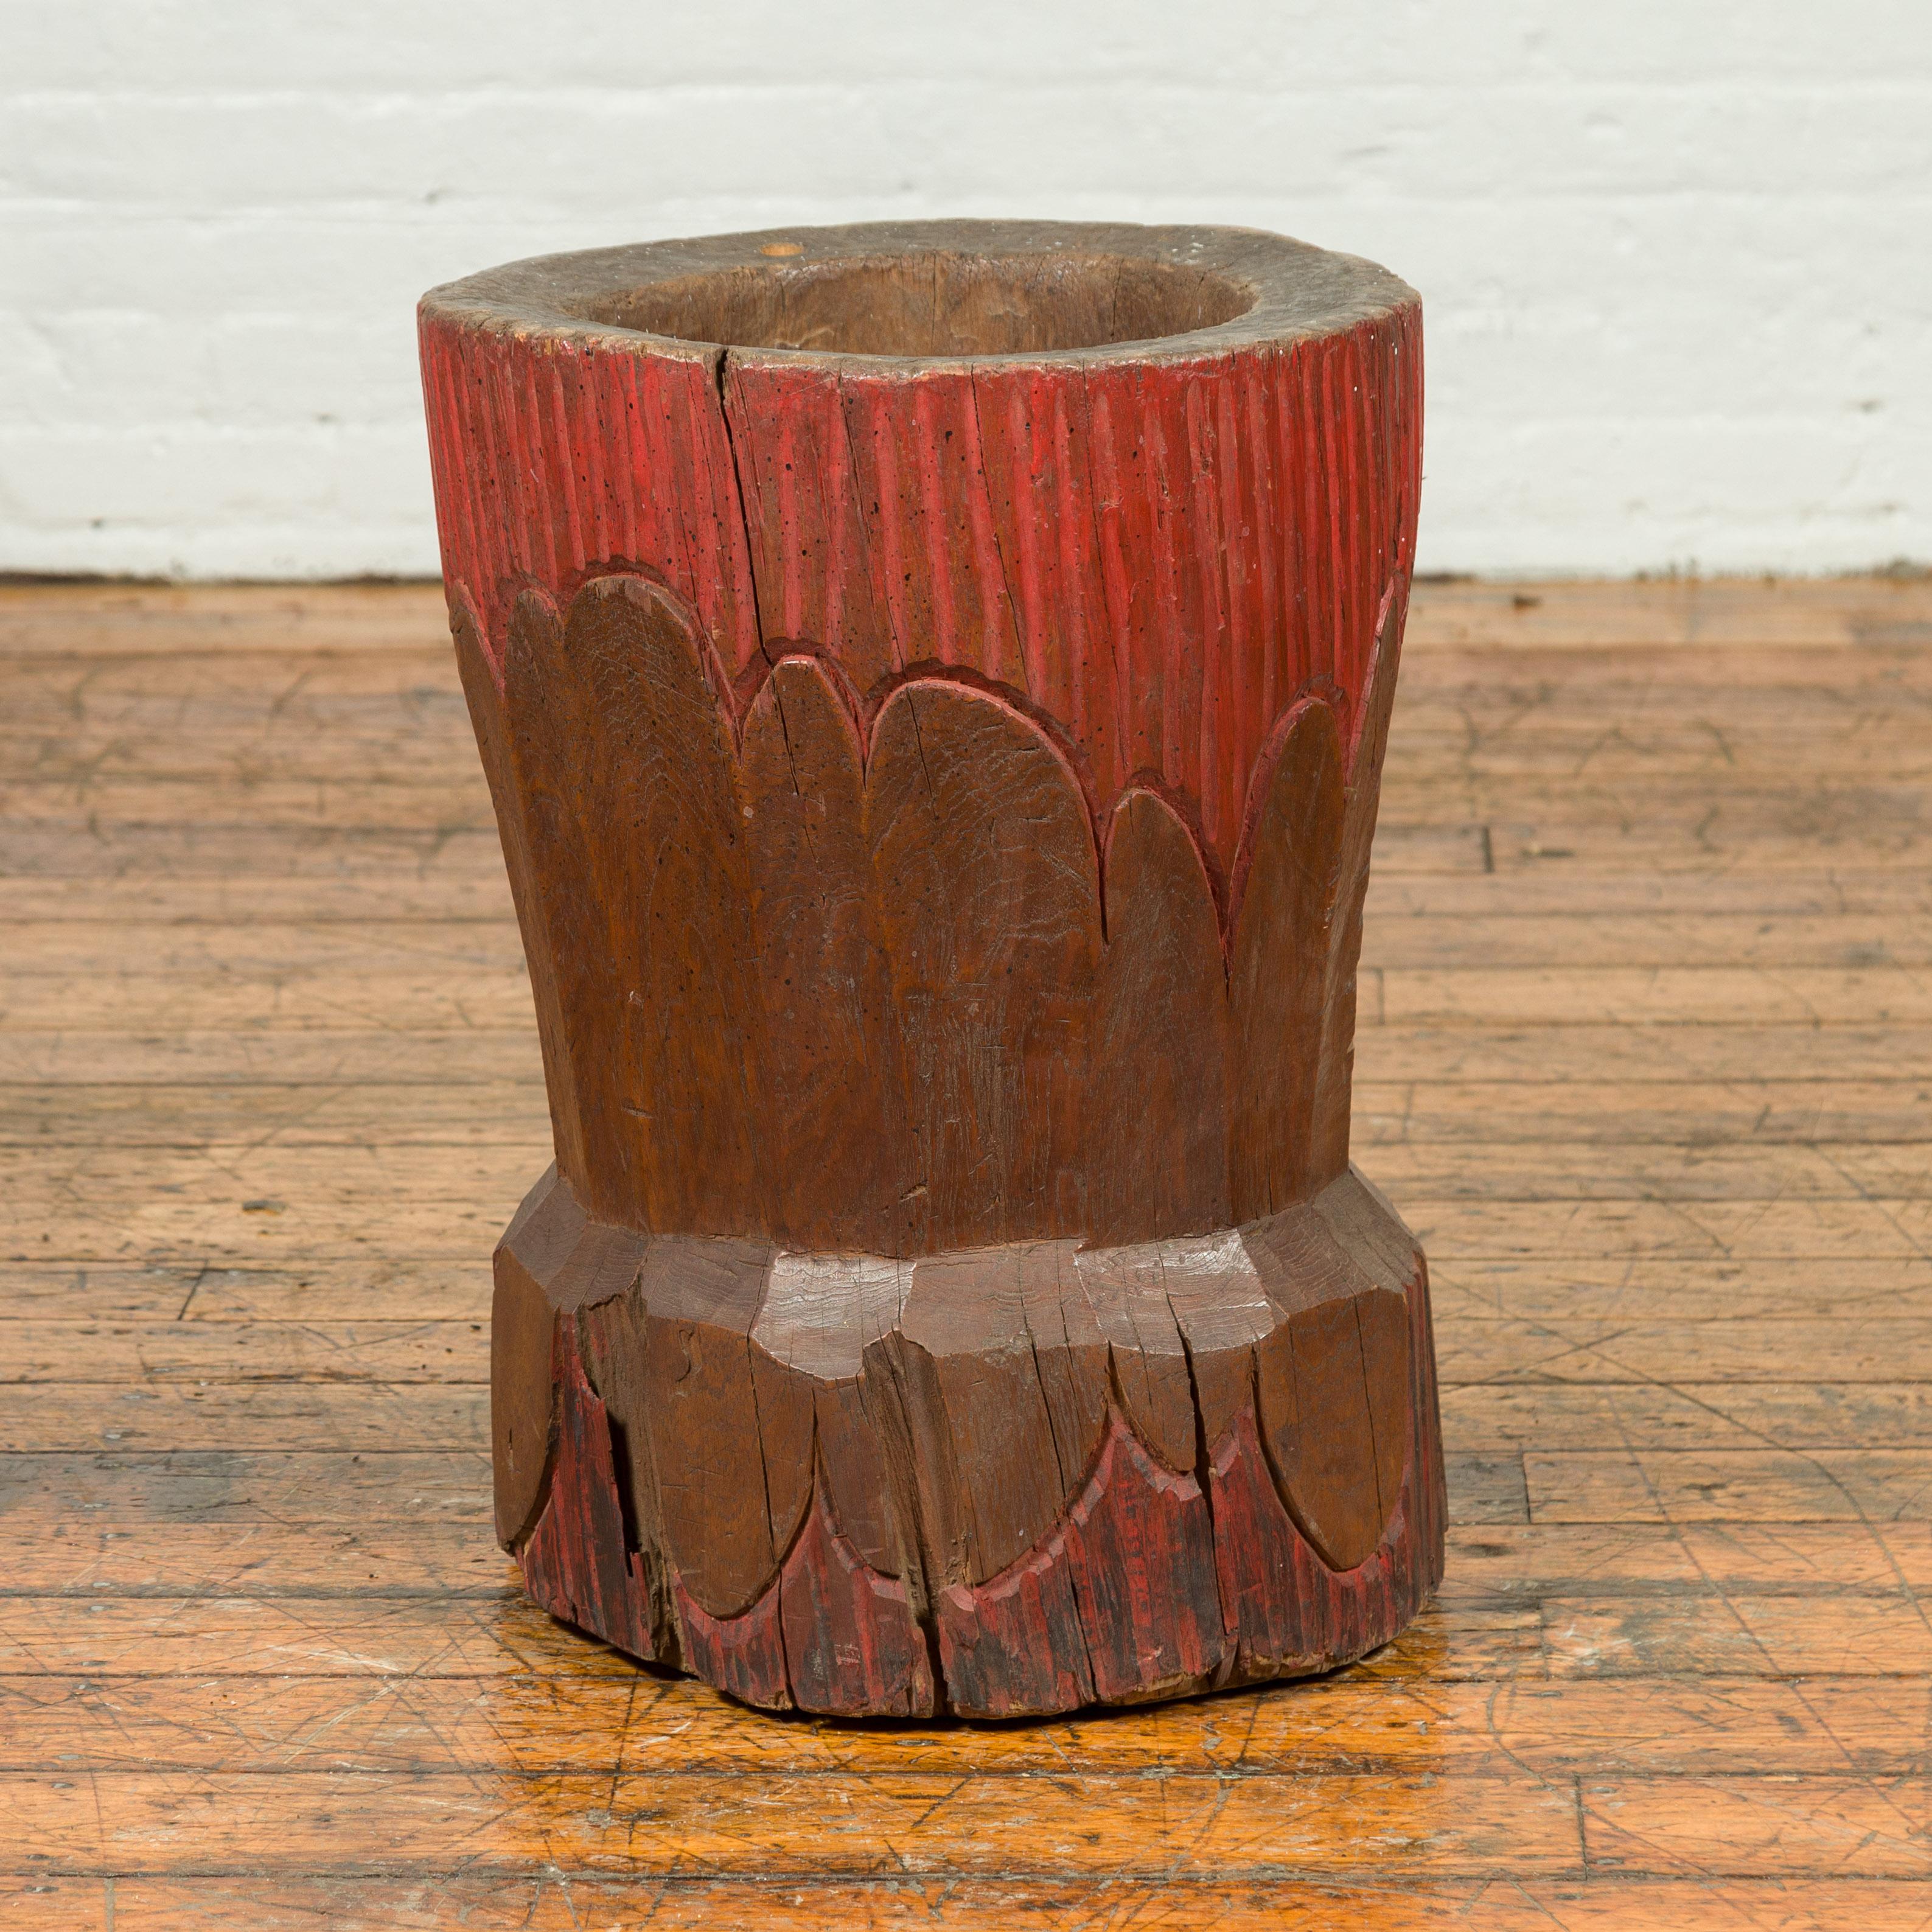 19th Century Antique Japanese Wooden Planter with Rustic Appearance and Red Patina For Sale